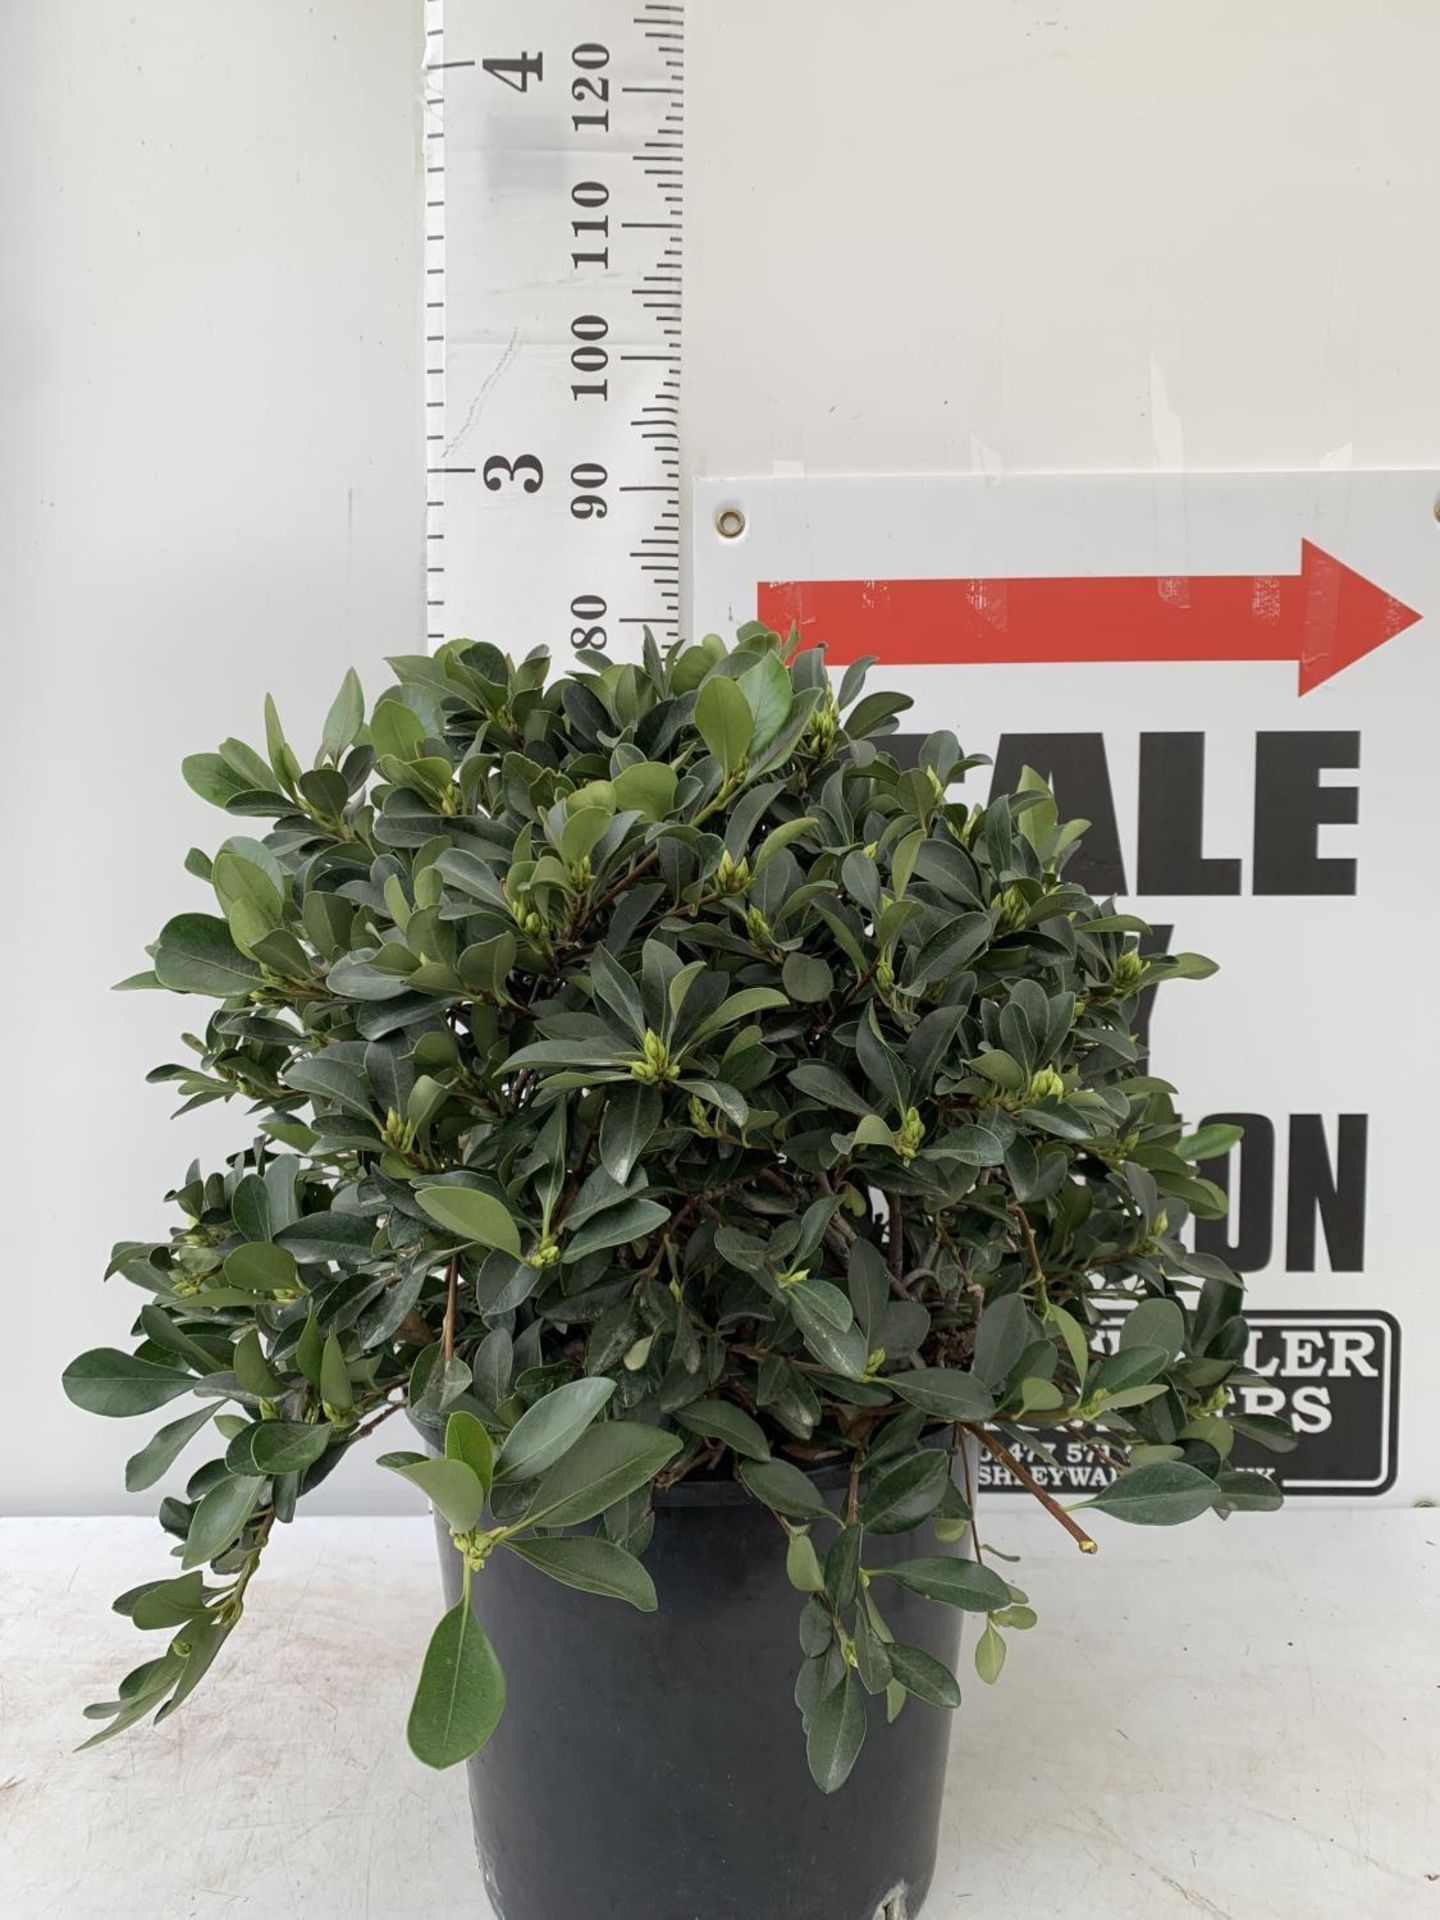 ONE RHAPHIOLEPIS UMBELLATA BUSH APPROX 80CM IN HEIGHT IN A 15 LTR POT PLUS VAT - Image 2 of 8